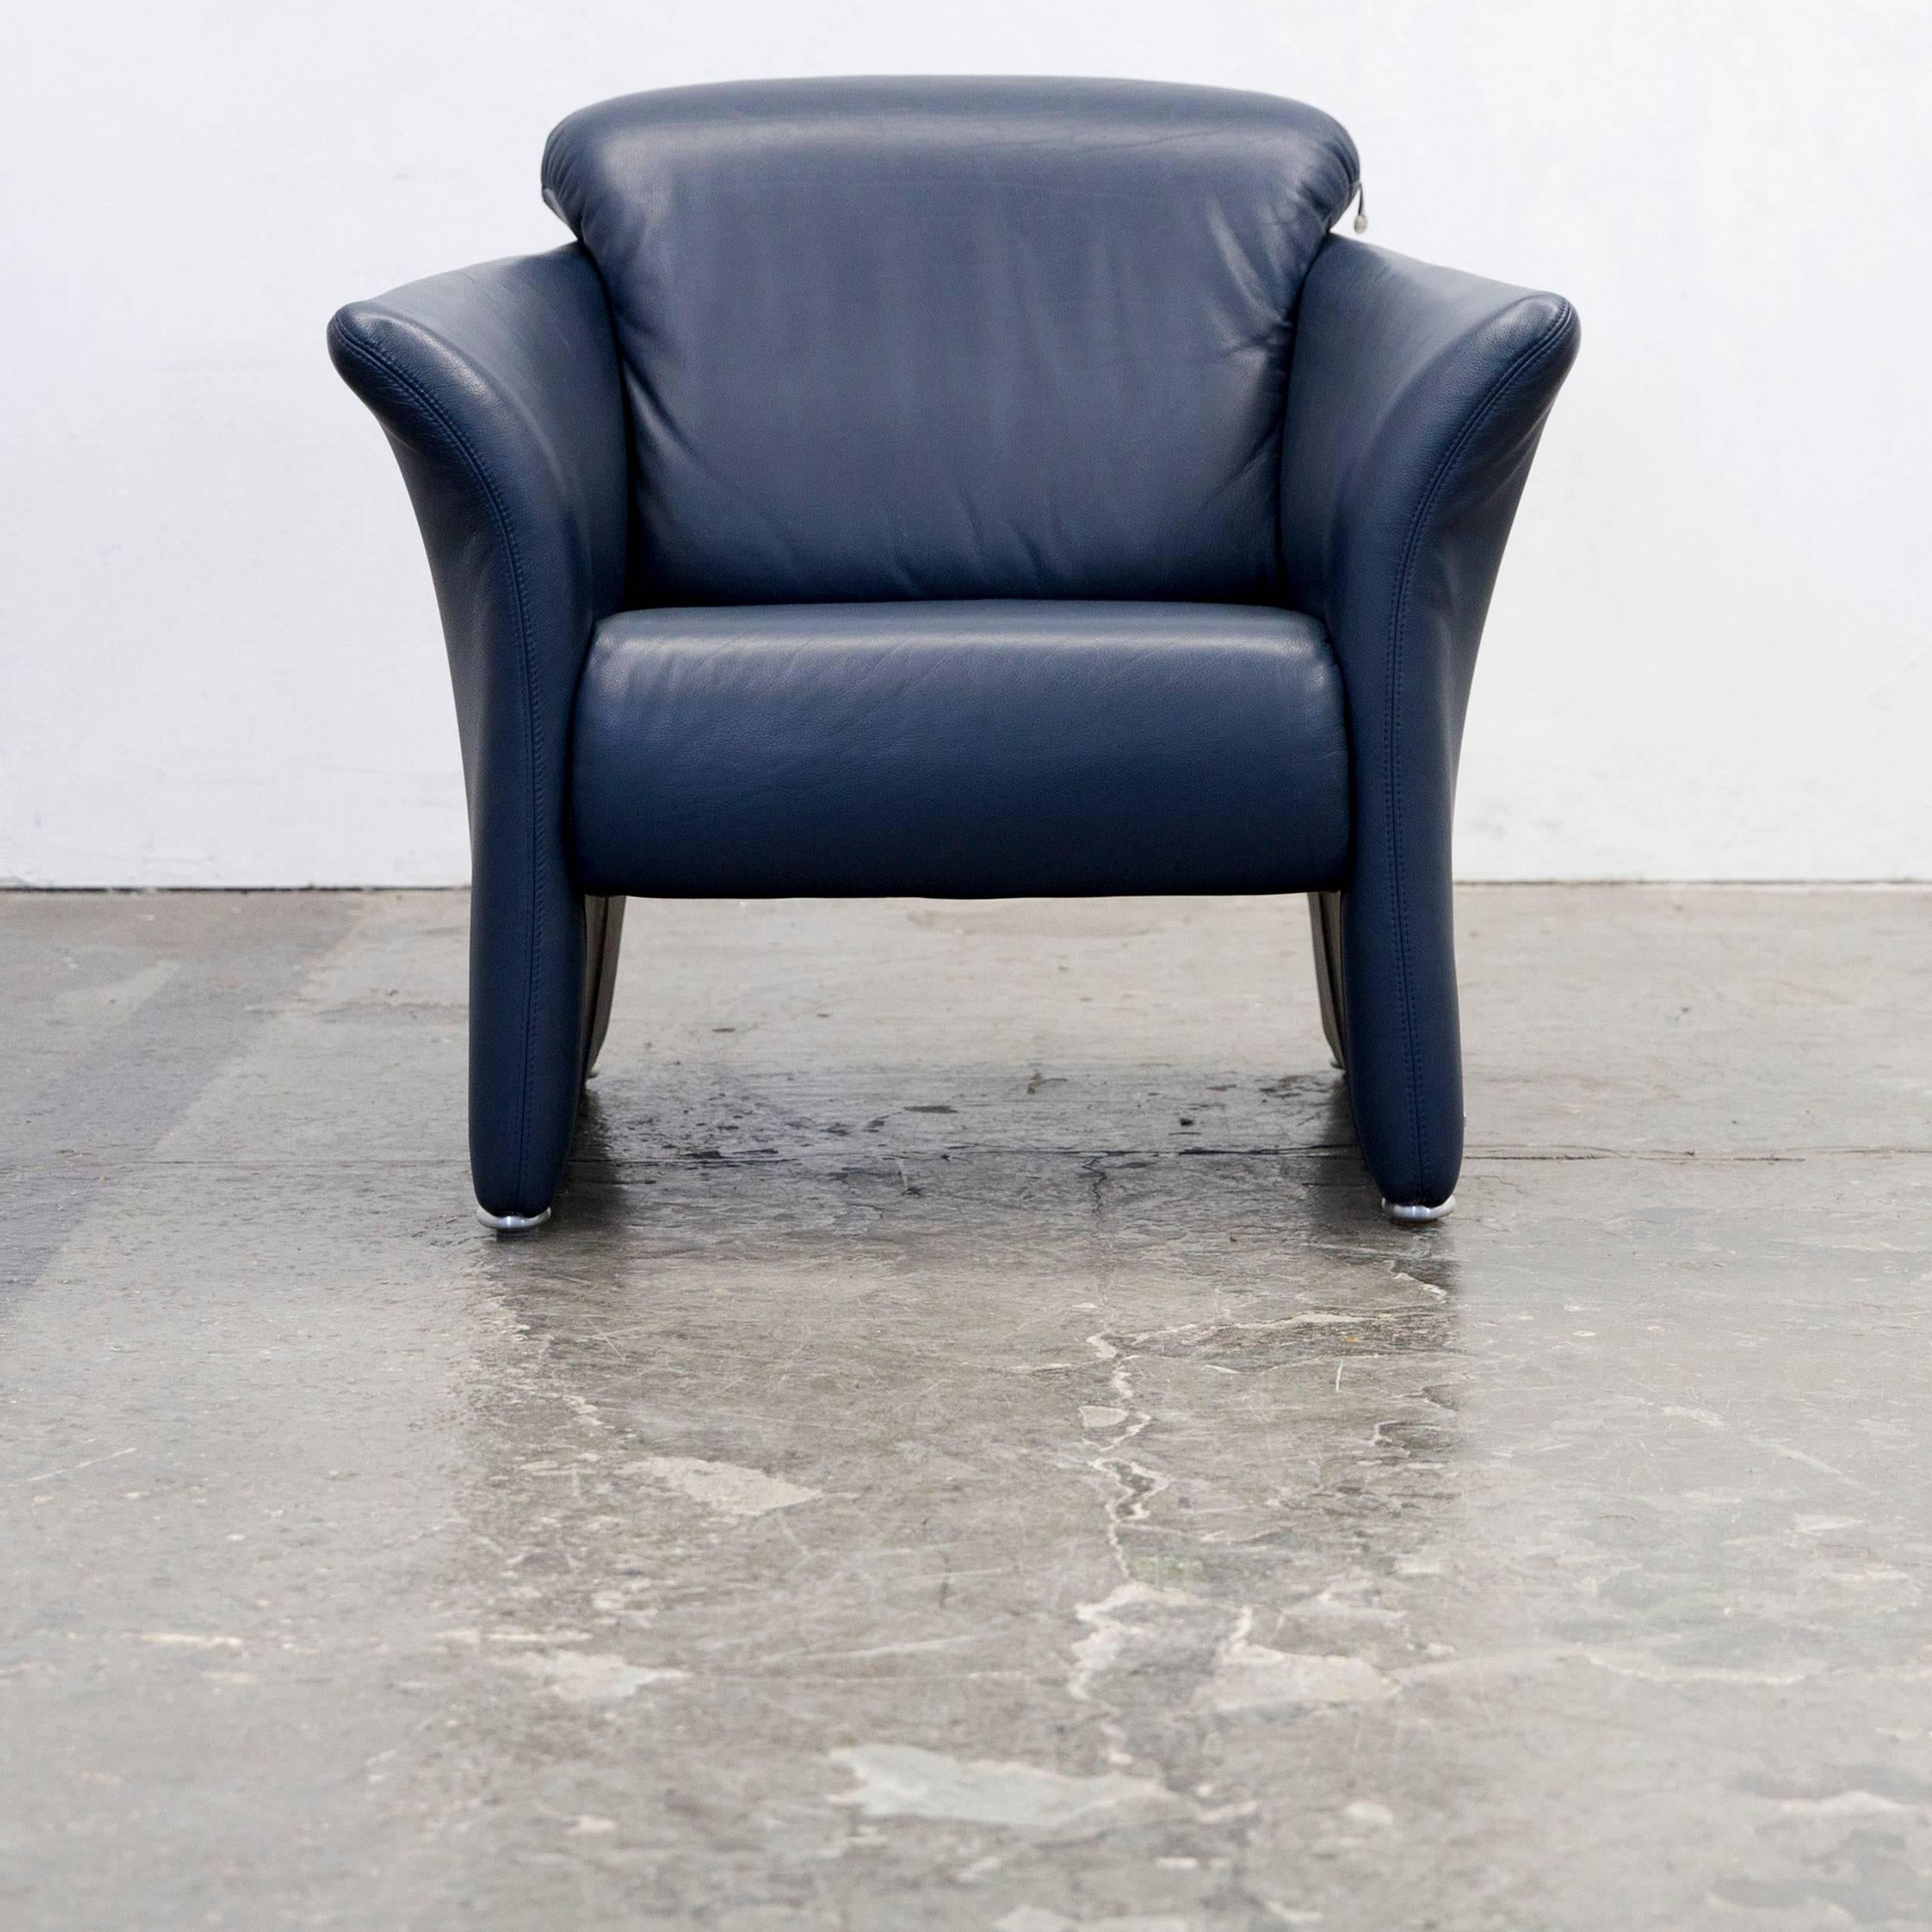 Blue colored original Koinor designer leather armchair in a minimalistic and modern design, made for pure comfort and style.